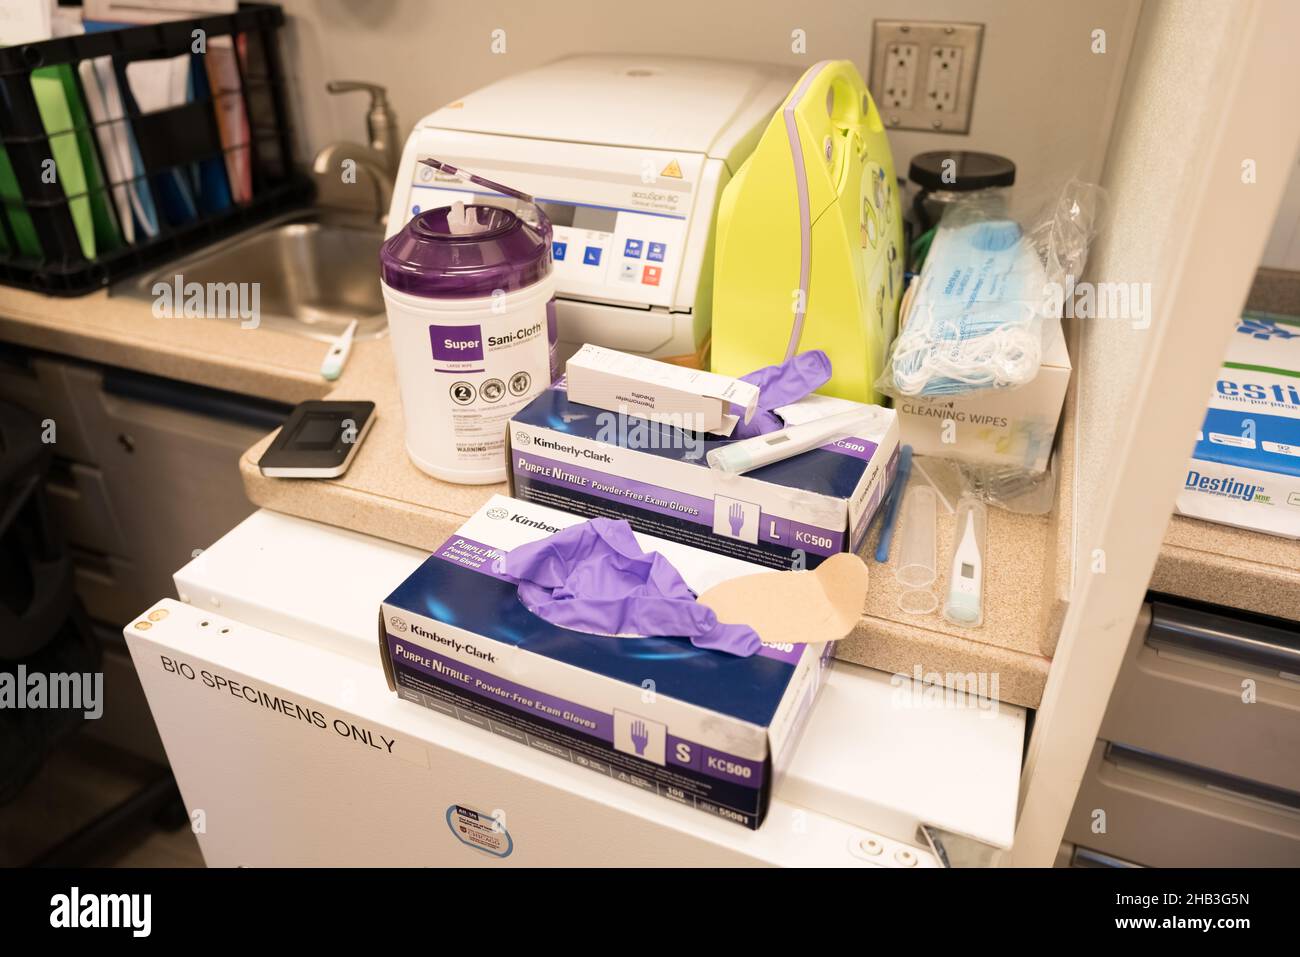 Laboratory space showing boxes of purple Kimberly-Clark disposable gloves sitting on top of a biological specimen refrigerator. Stock Photo